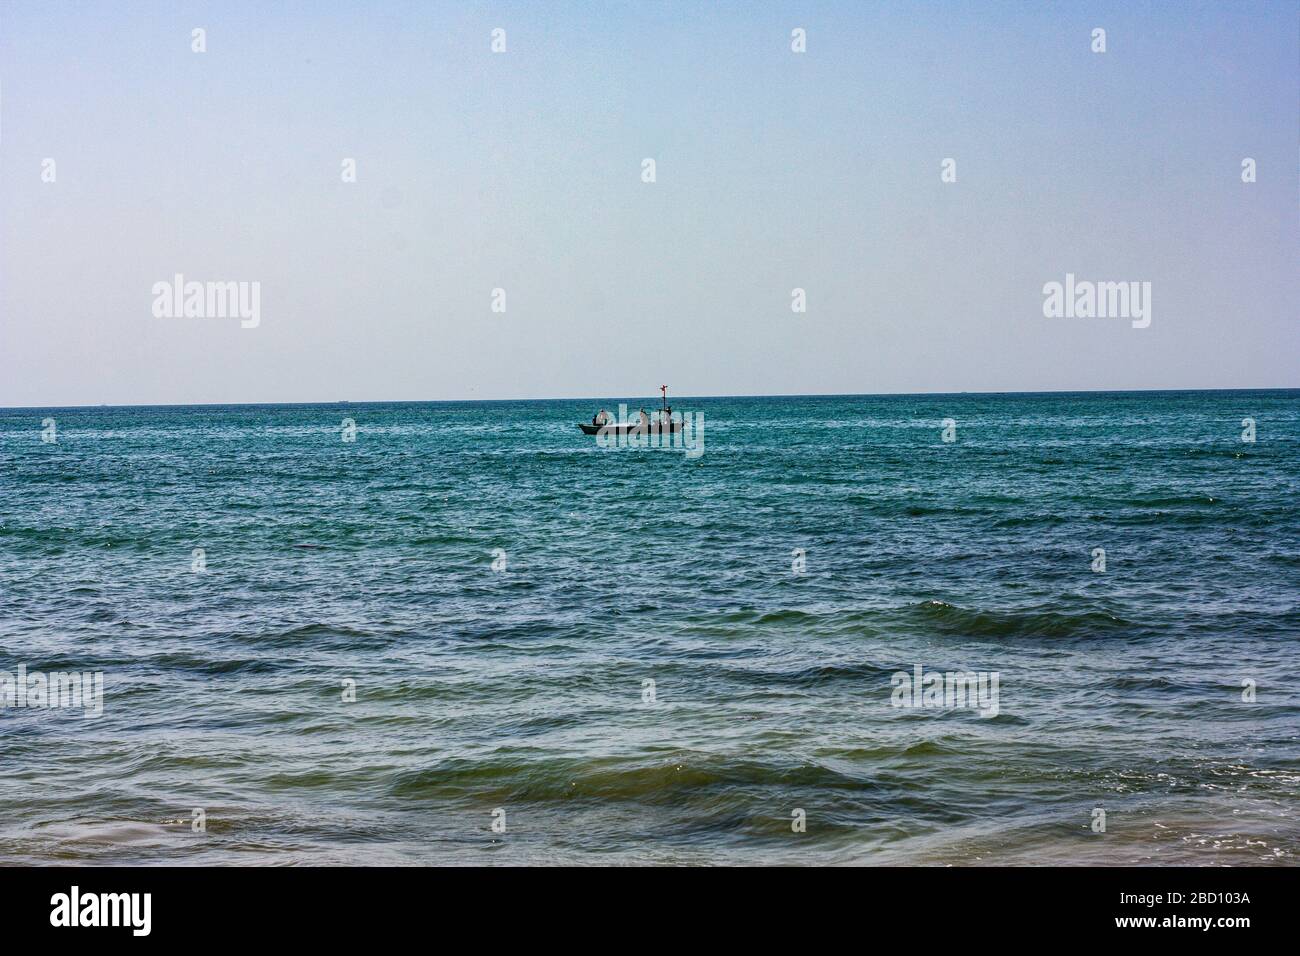 Tushan Beach, Hawks Bay, Karachi, Pakistan On 24-02-2019 While Some Local Boats Are Fishing At Afternoon Stock Photo